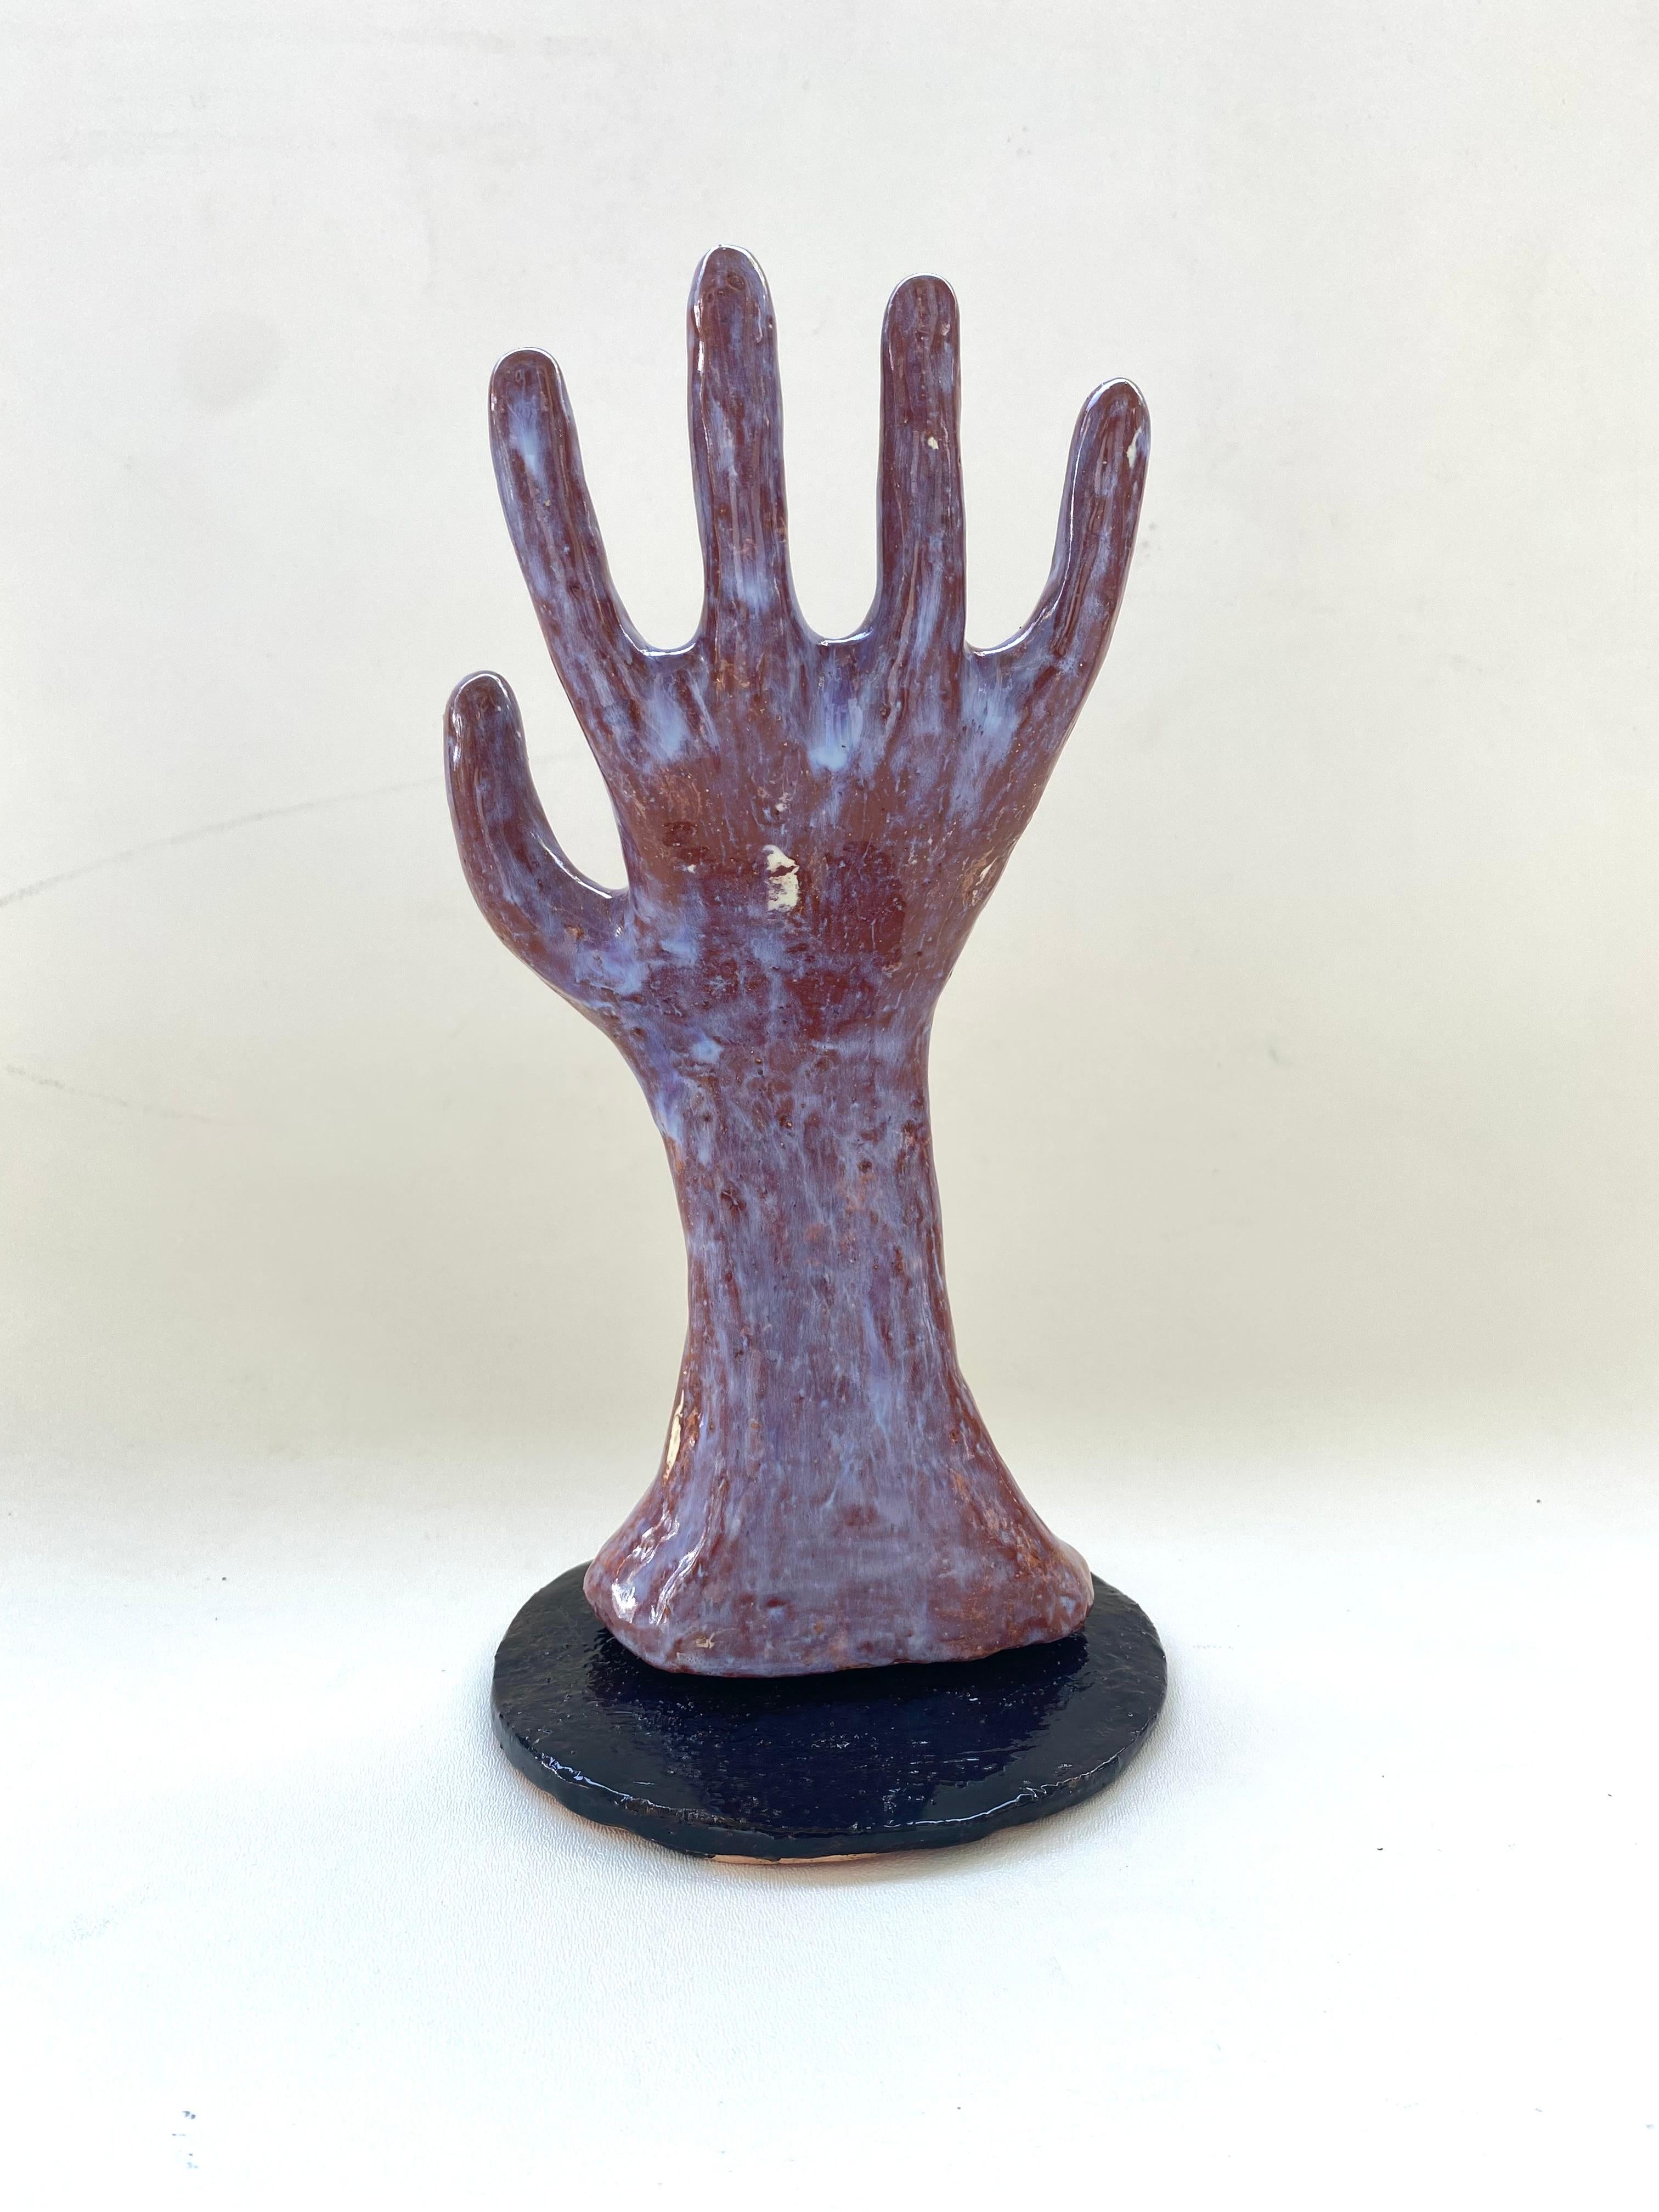 Hand Built Sculptural Glazed Ceramic Hand Jewelry Display

Offered for sale is a handmade functional art ceramic hand that is signed and dated by Rexx Fischer. The hand is both a functional and a sculptural object. Rexx is a painter and ceramicist.